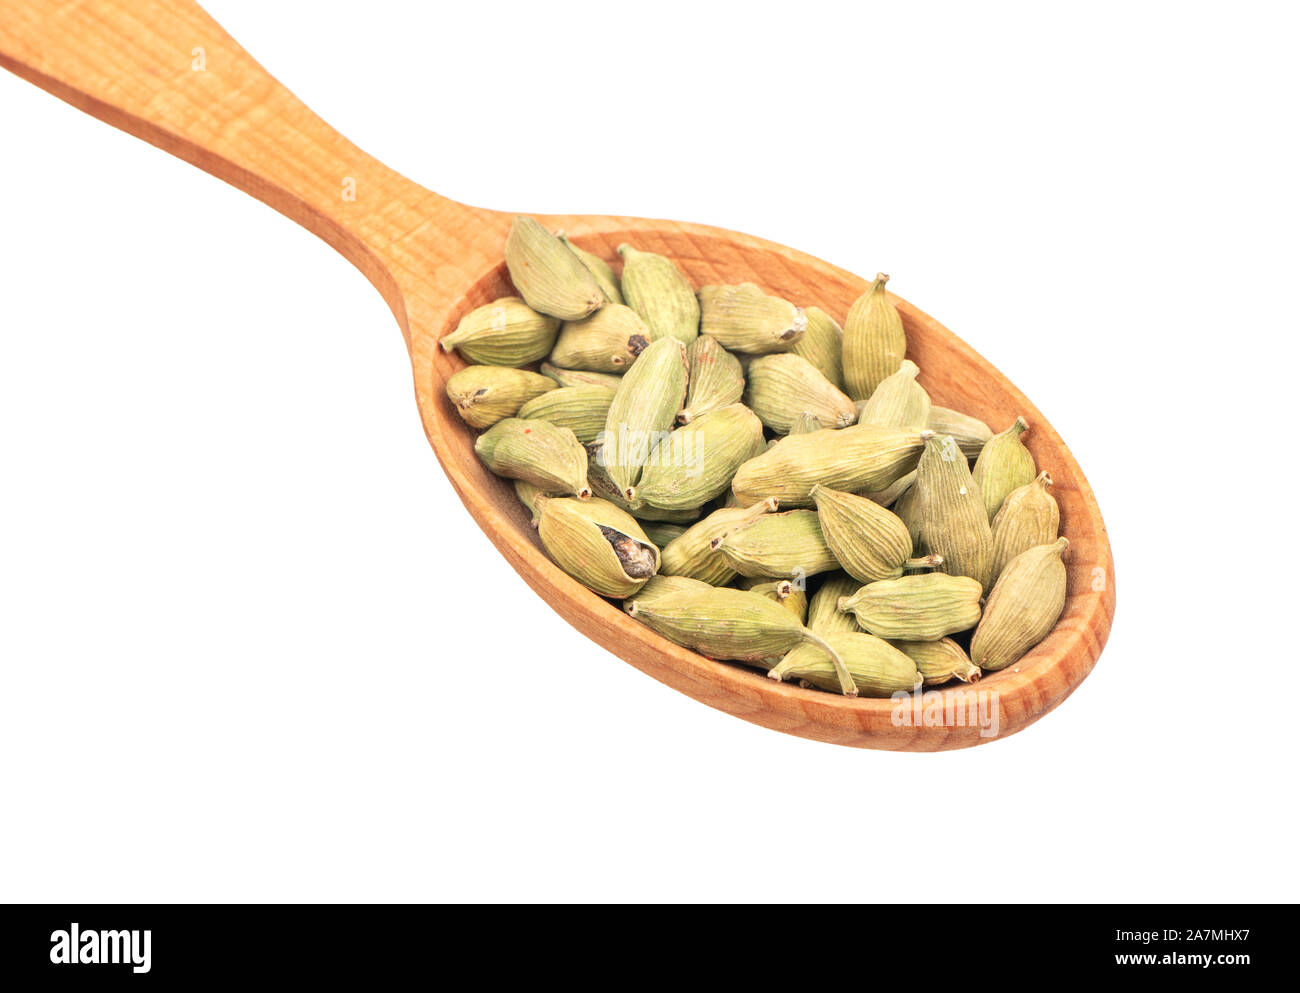 Large wooden spoon with dry cardamom isolated on white background closeup Stock Photo